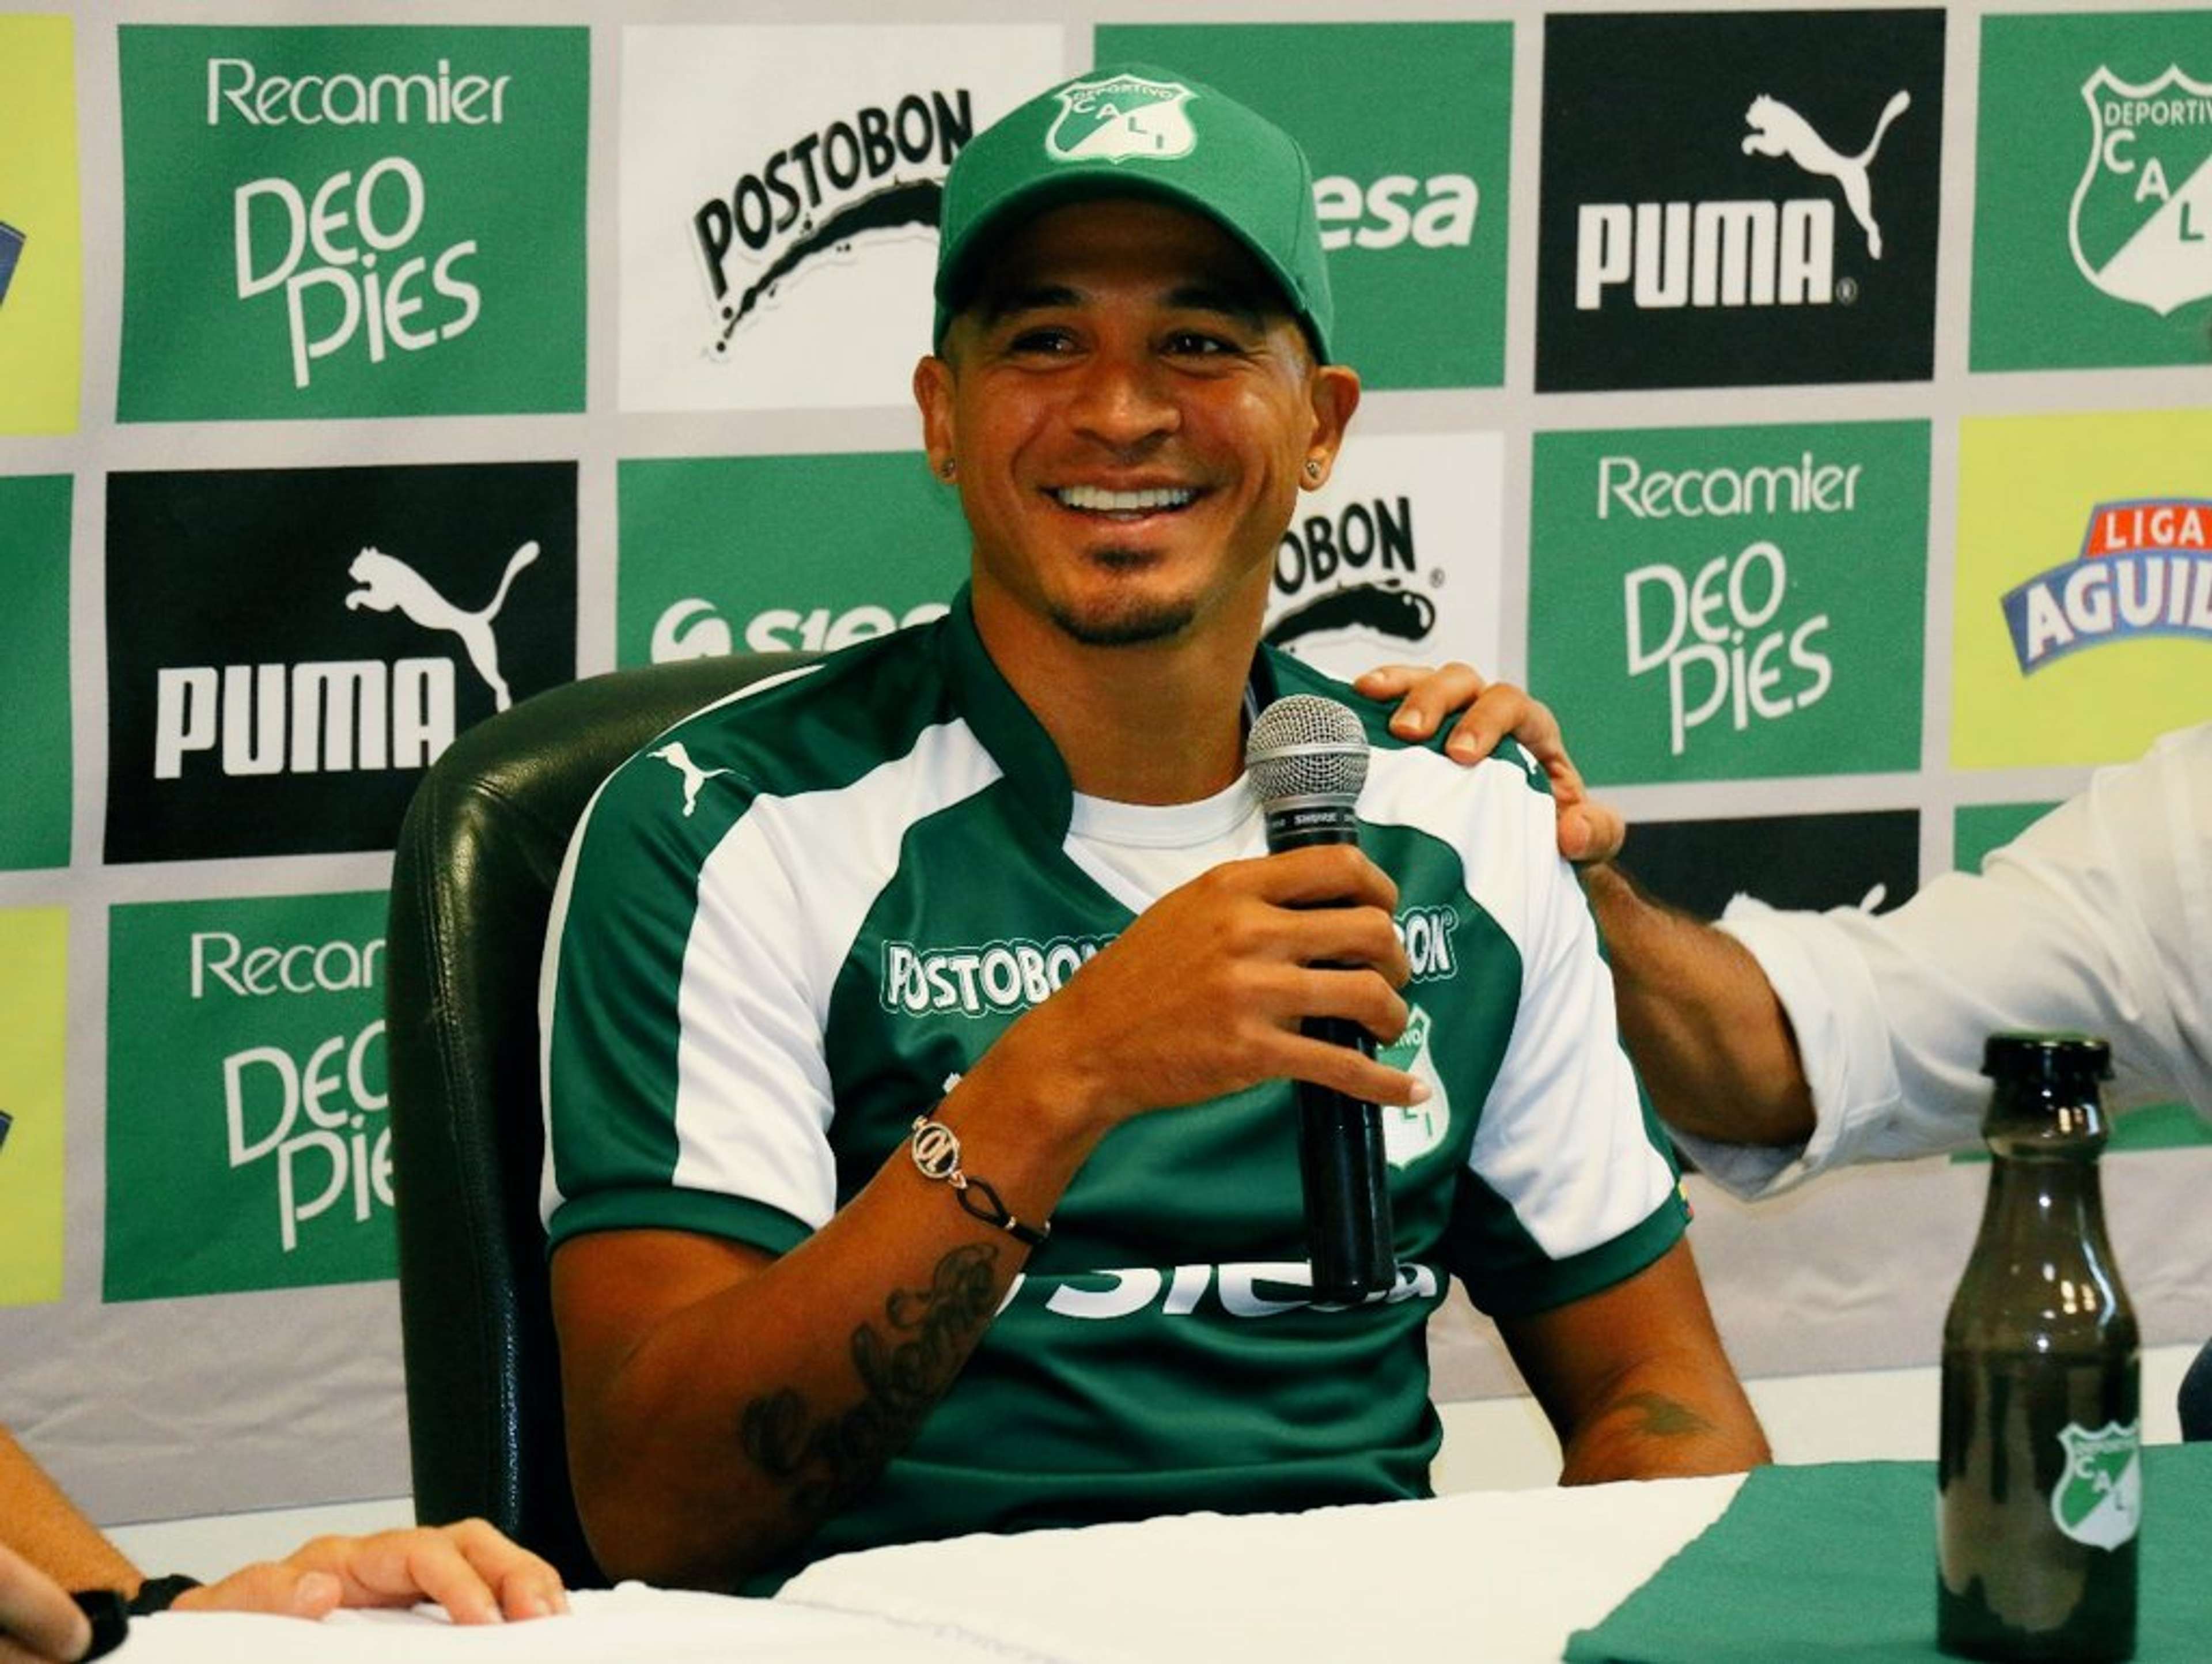 Macnelly Torres Deportivo Cali